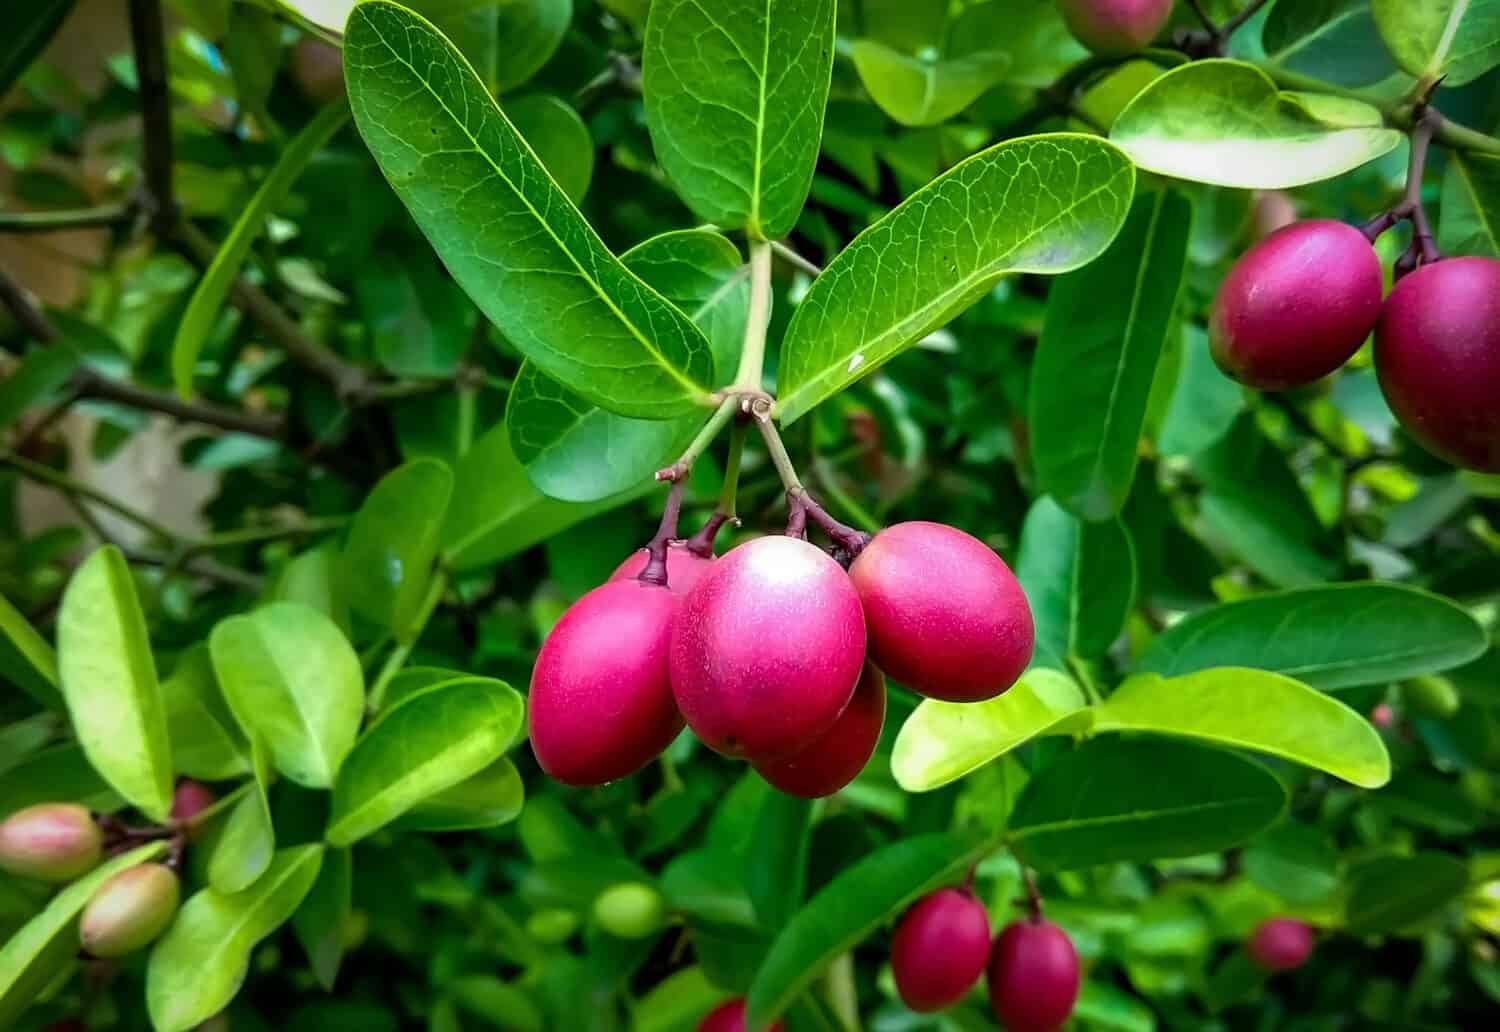 Indian cherry or riberry fruits hanging on the tree